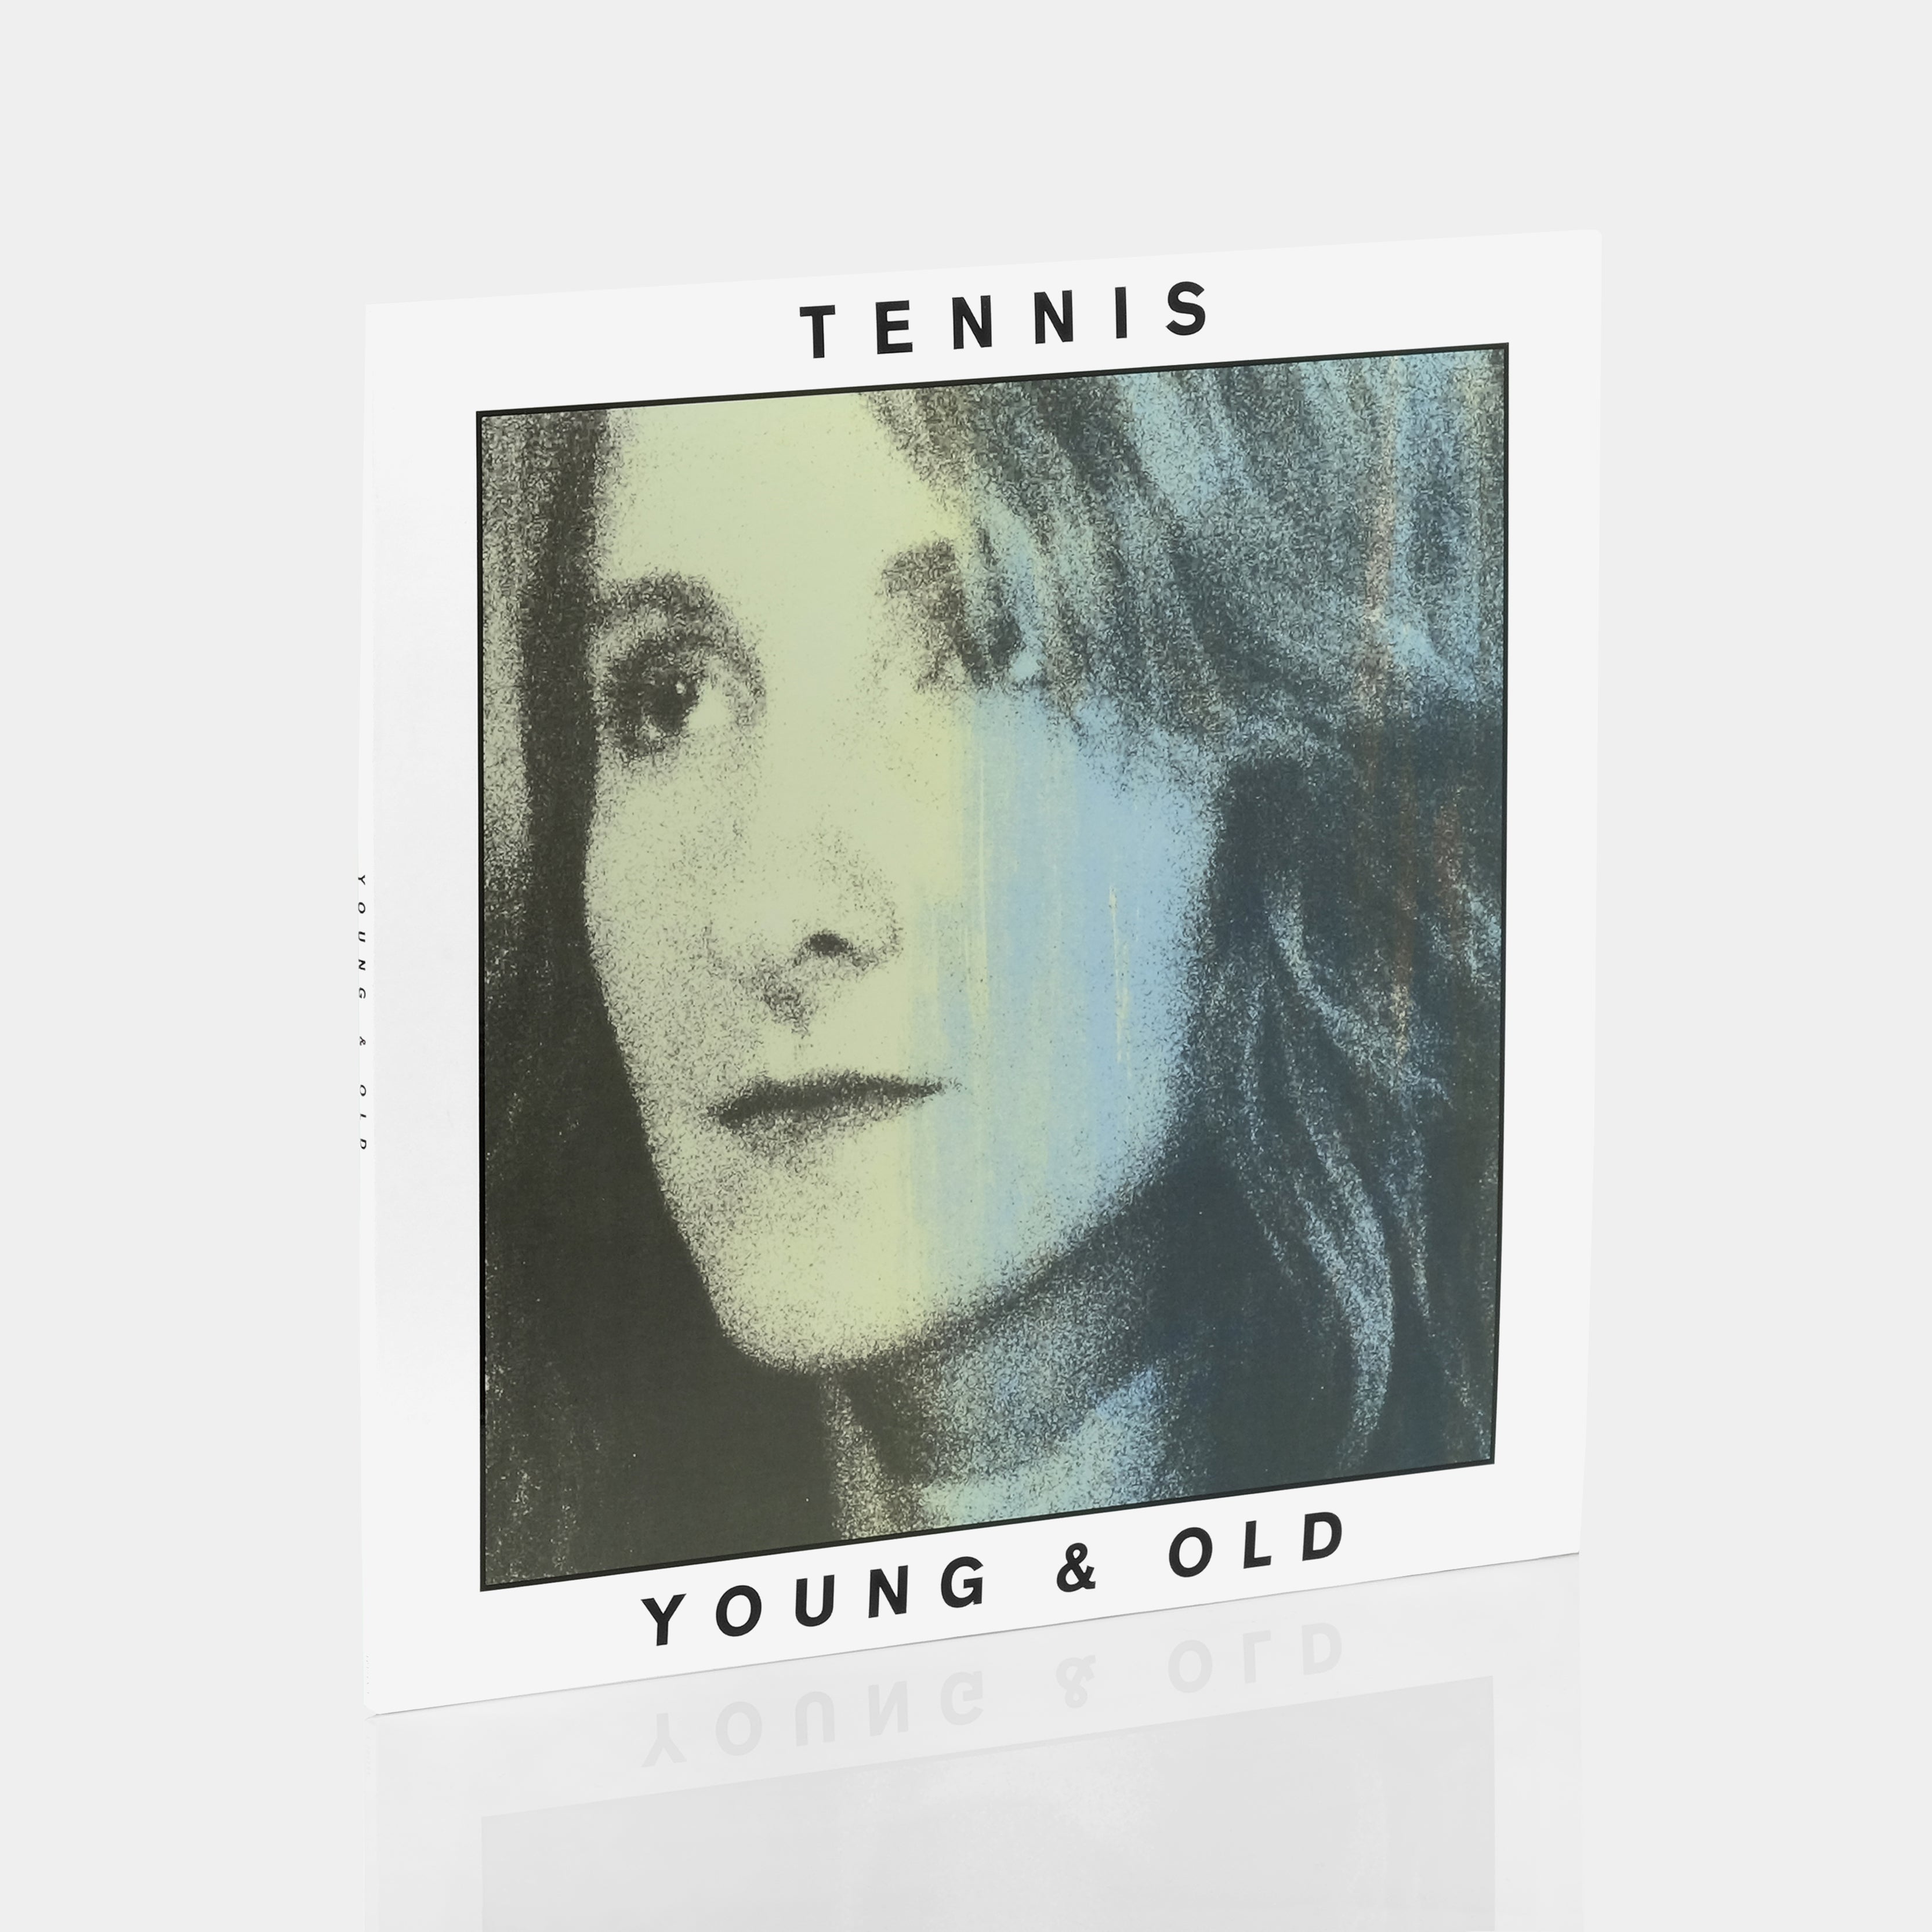 Tennis - Young & Old LP Vinyl Record